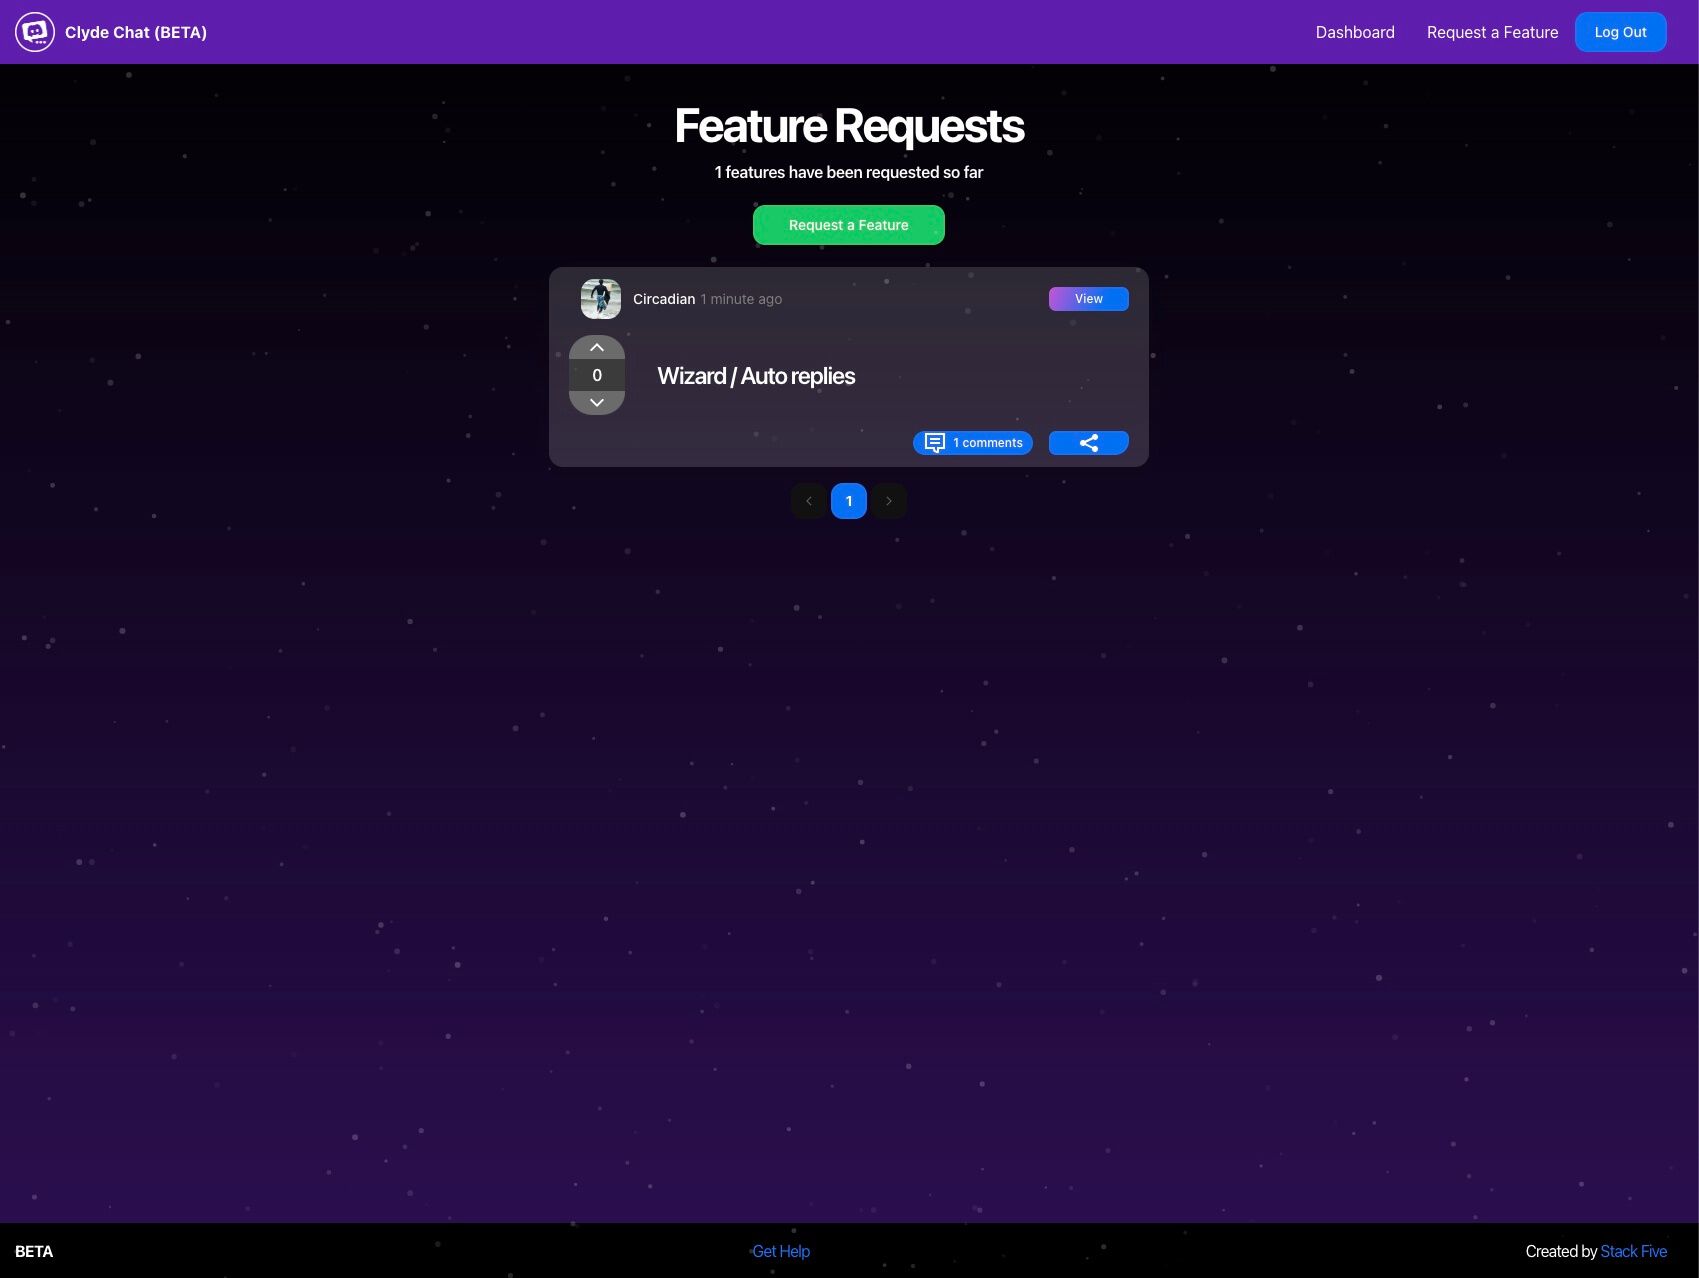 Request a feature